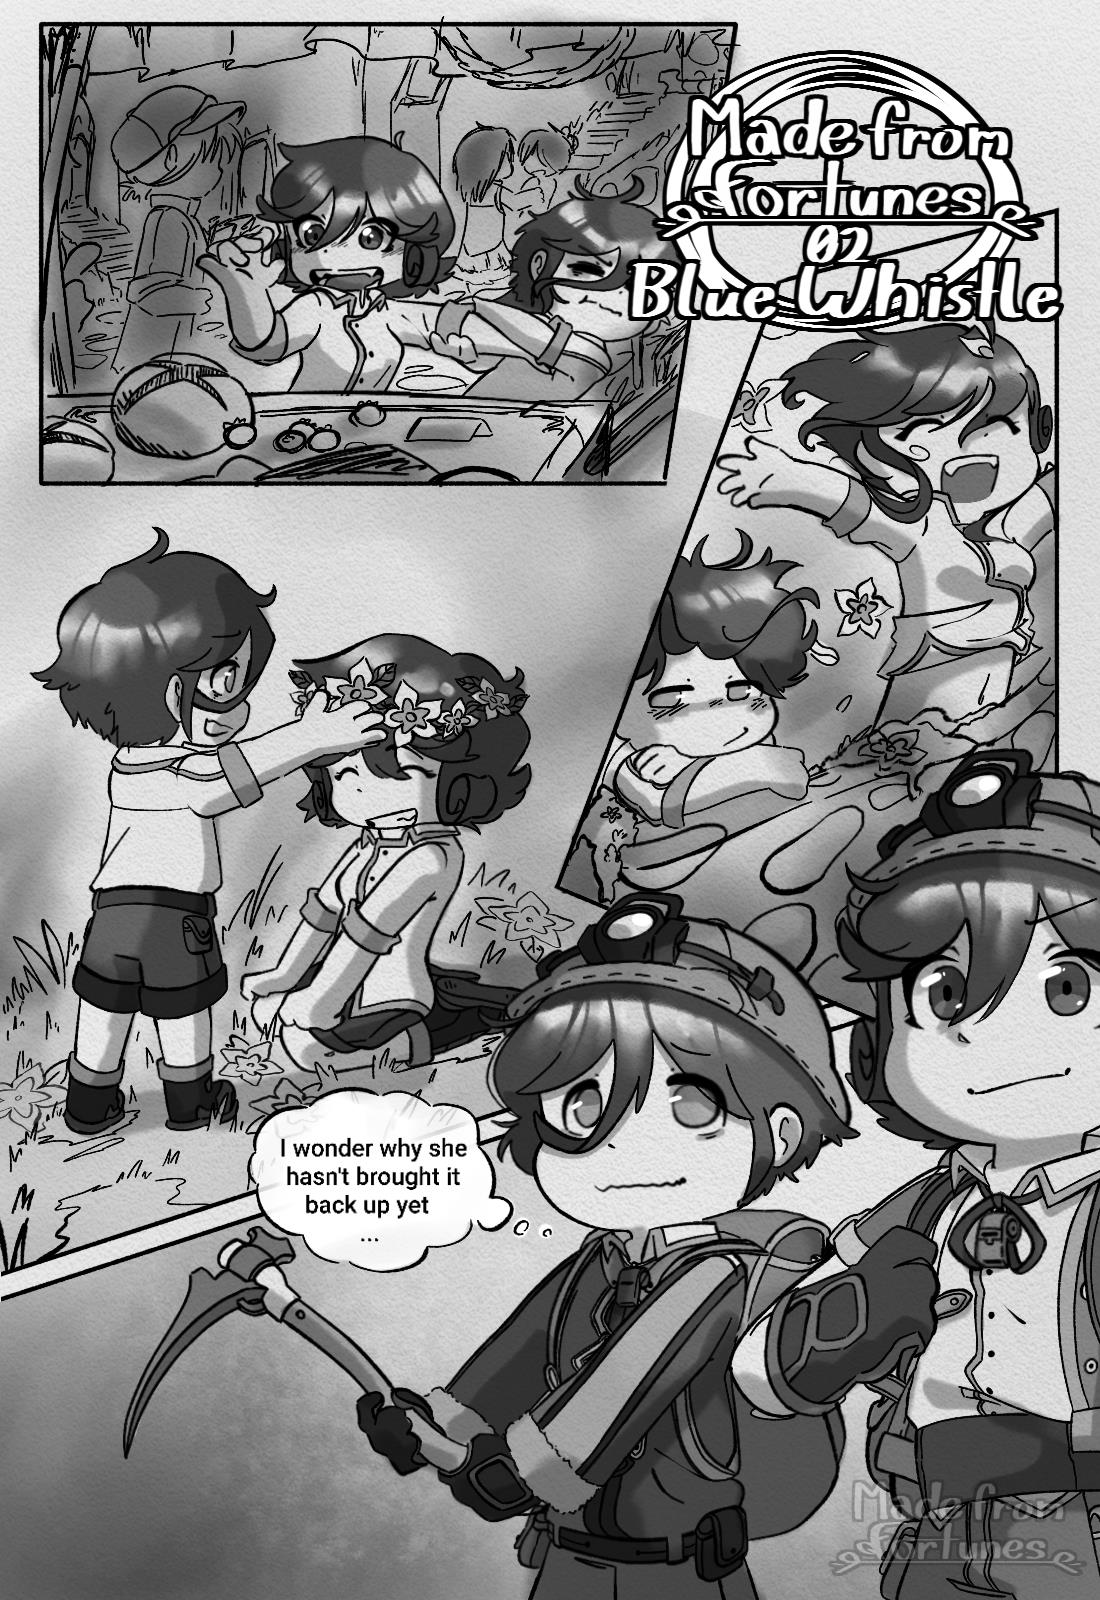 Made From Fortunes (Made In Abyss Fanmade Comic) - chapter 2 - #1